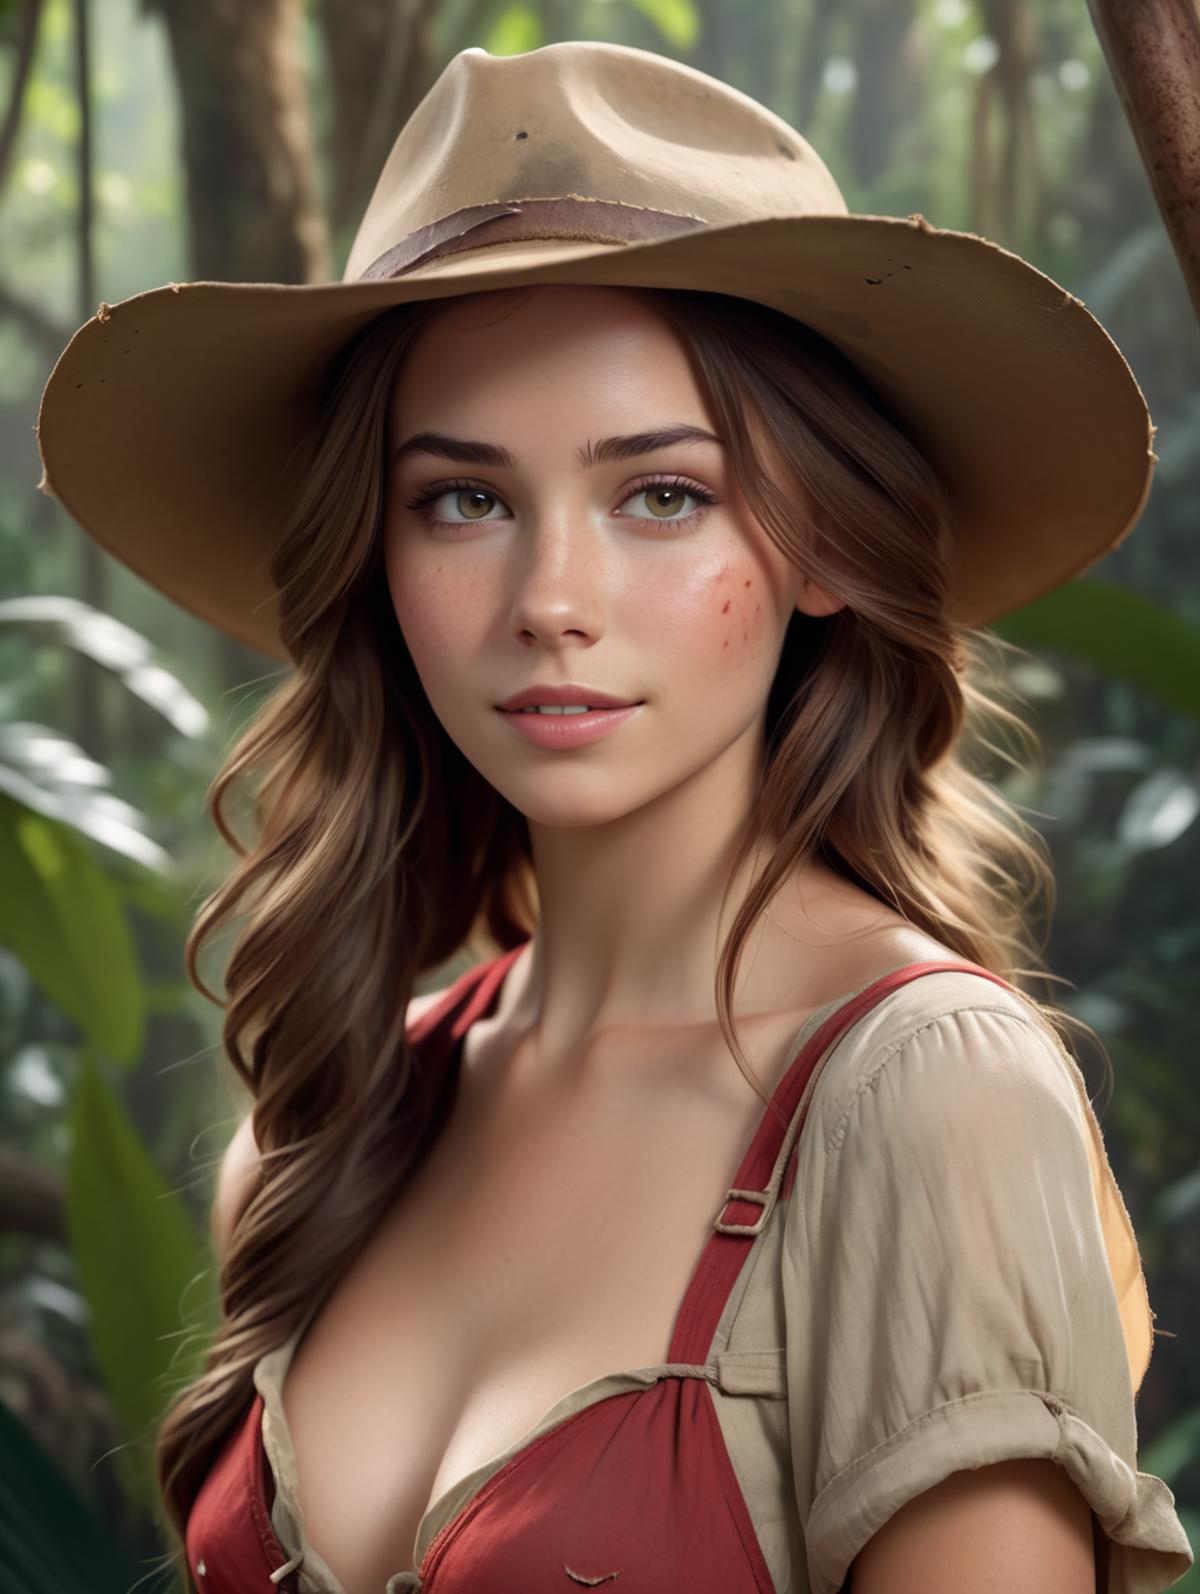 A Woman Wearing a Hat and Suspenders Poses in a Forest.